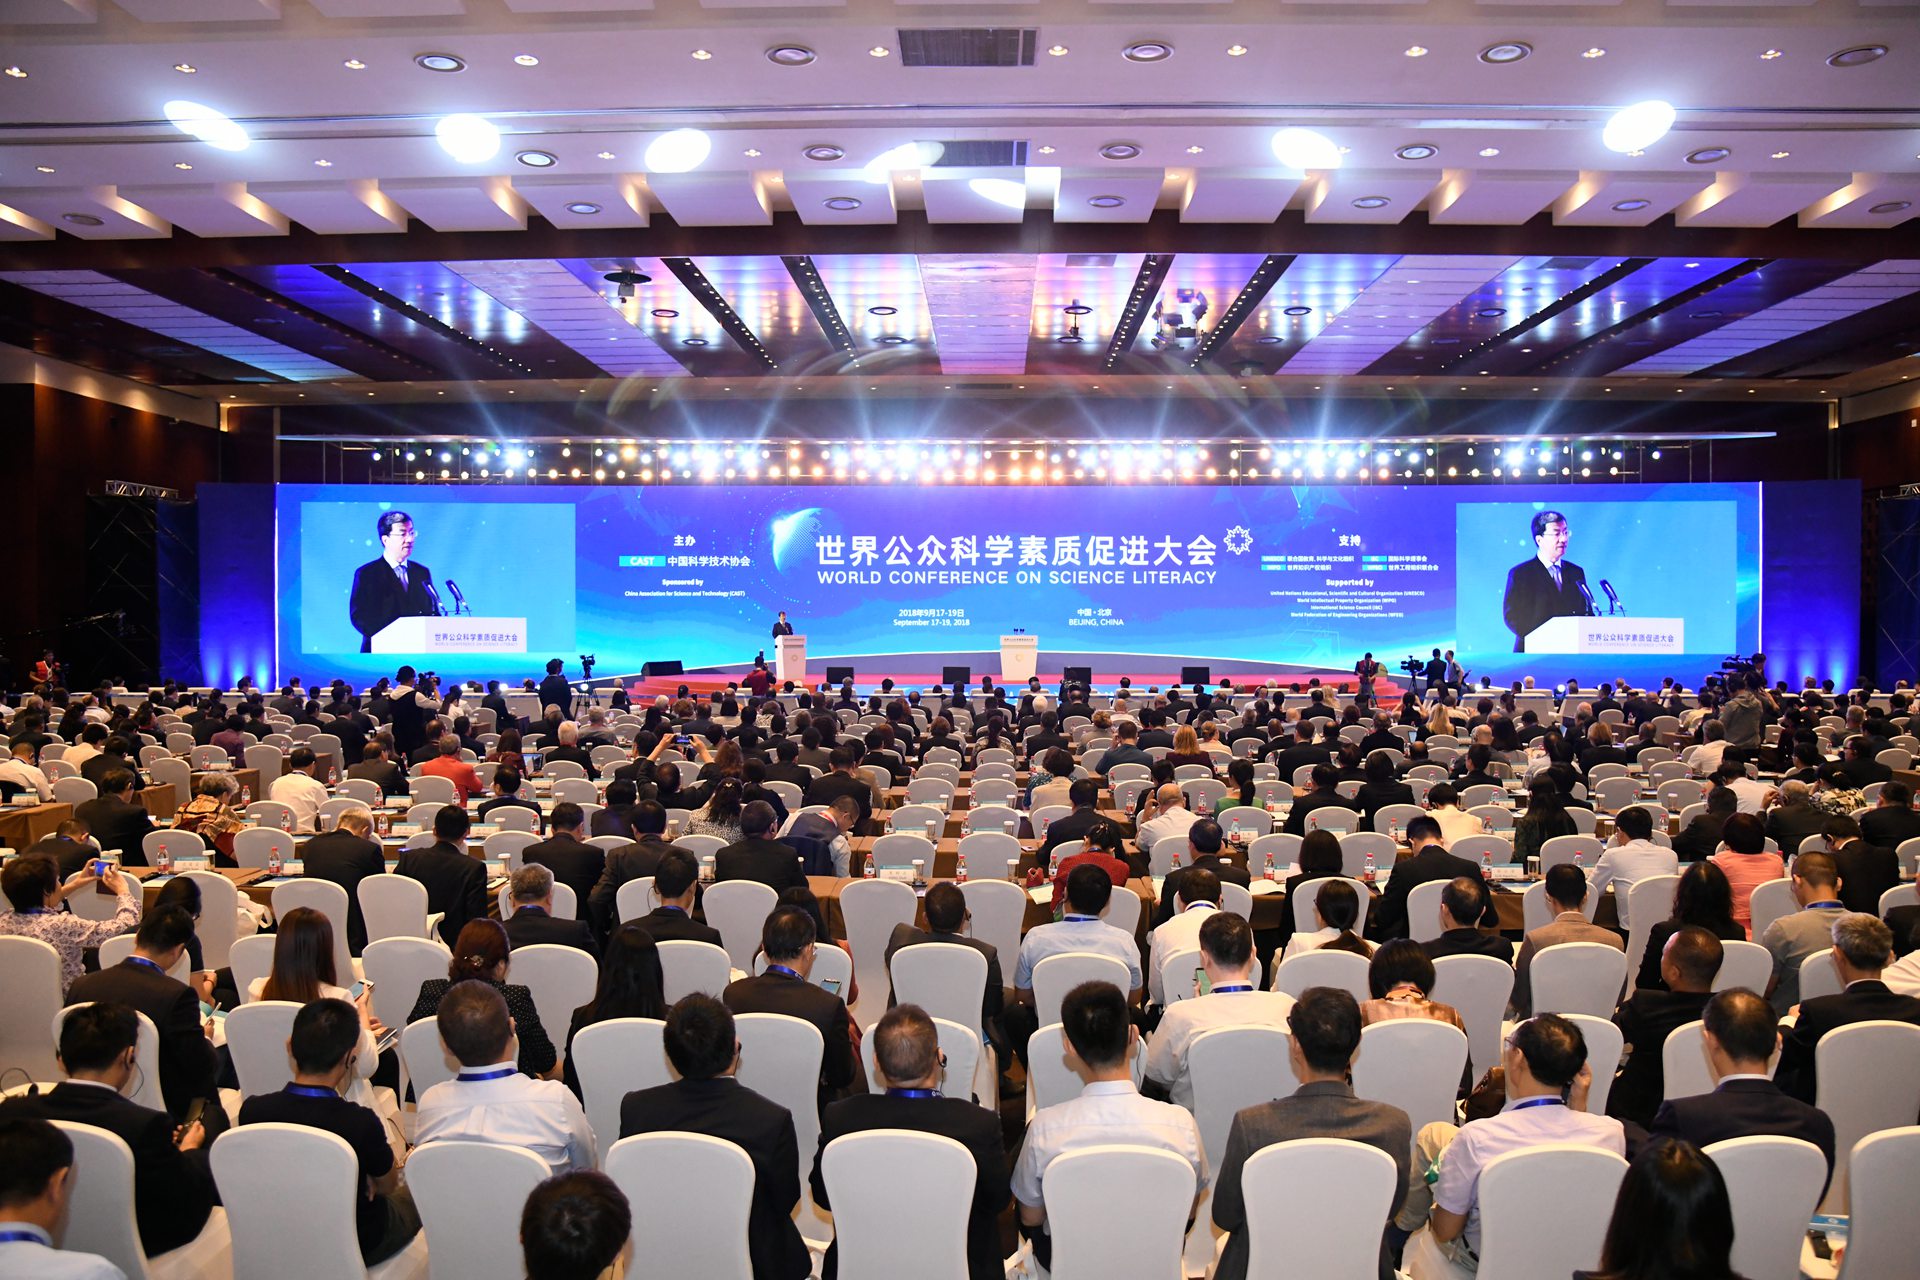 World Conference on Science Literacy 2018 held in Beijing